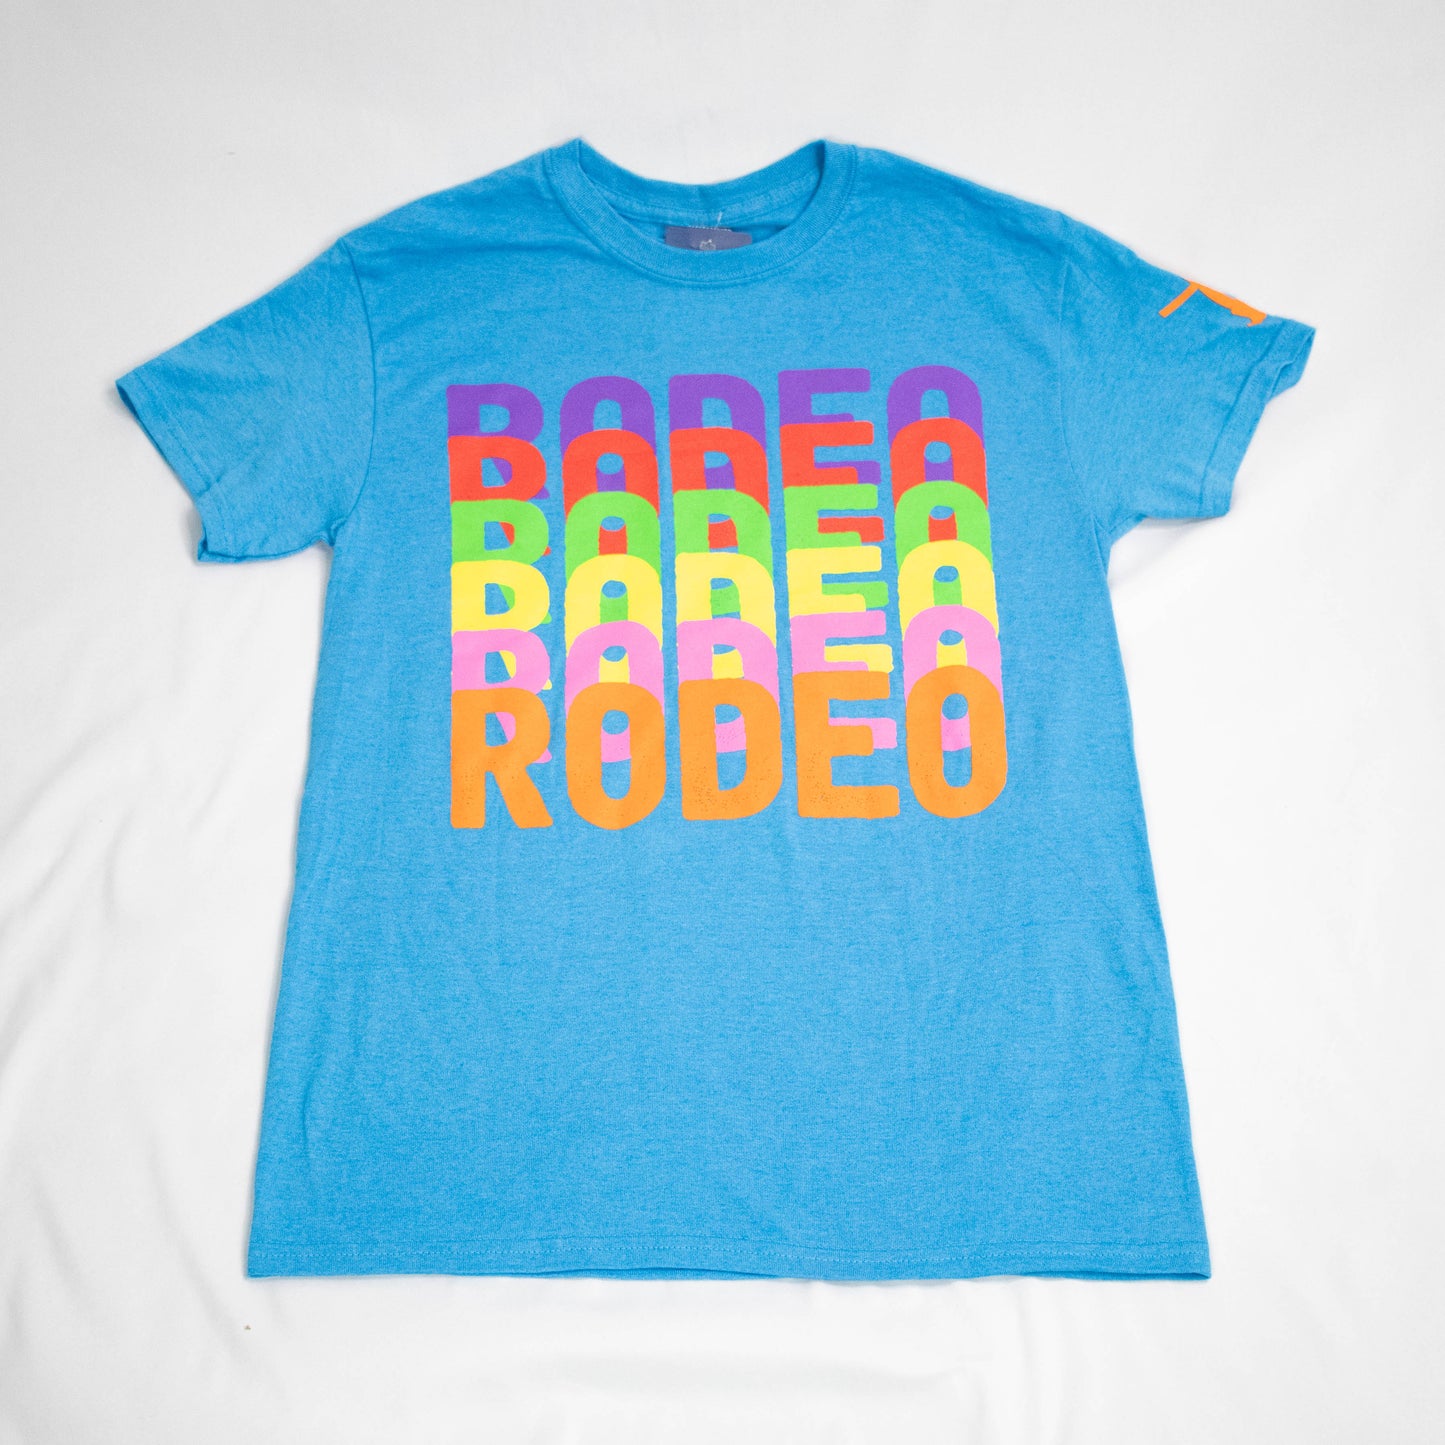 Rodeo Colors Tee